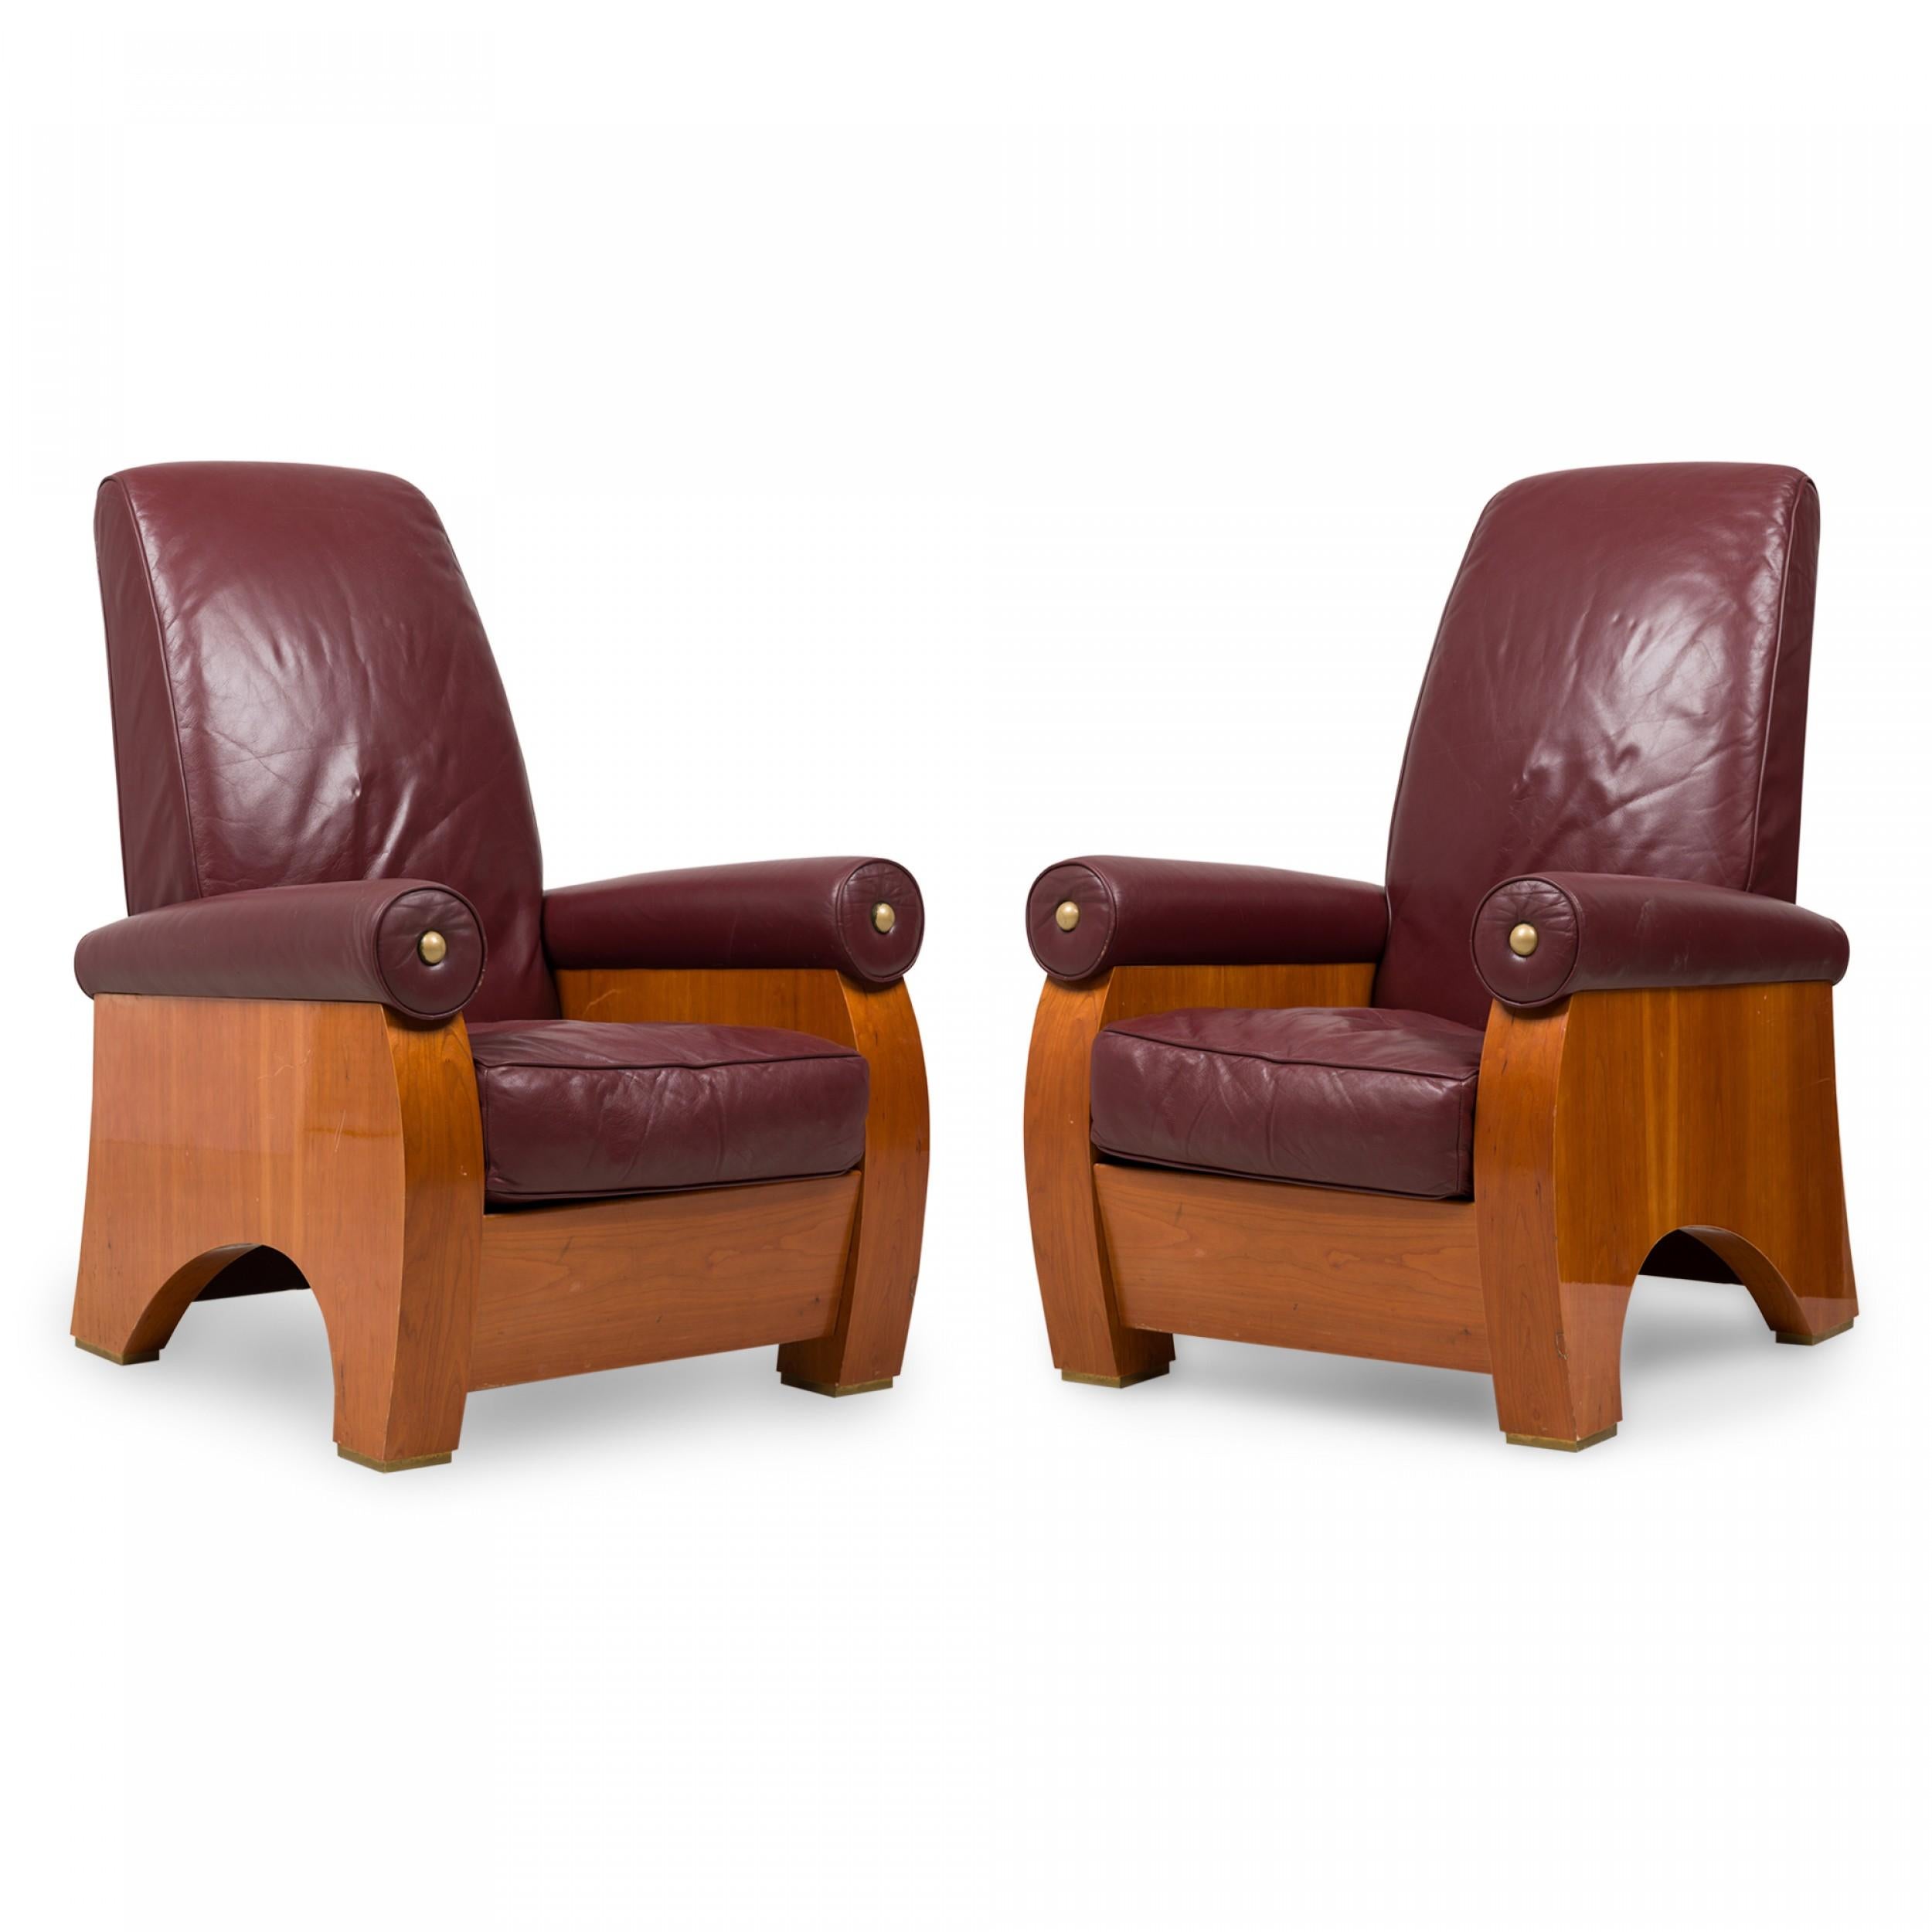 Pair of midcentury American high back mahogany armchairs upholstered in burgundy red leather with rolled arms, brass caps, arched feet and a cut out profile. (Pace Collection) (PRICED AS PAIR).